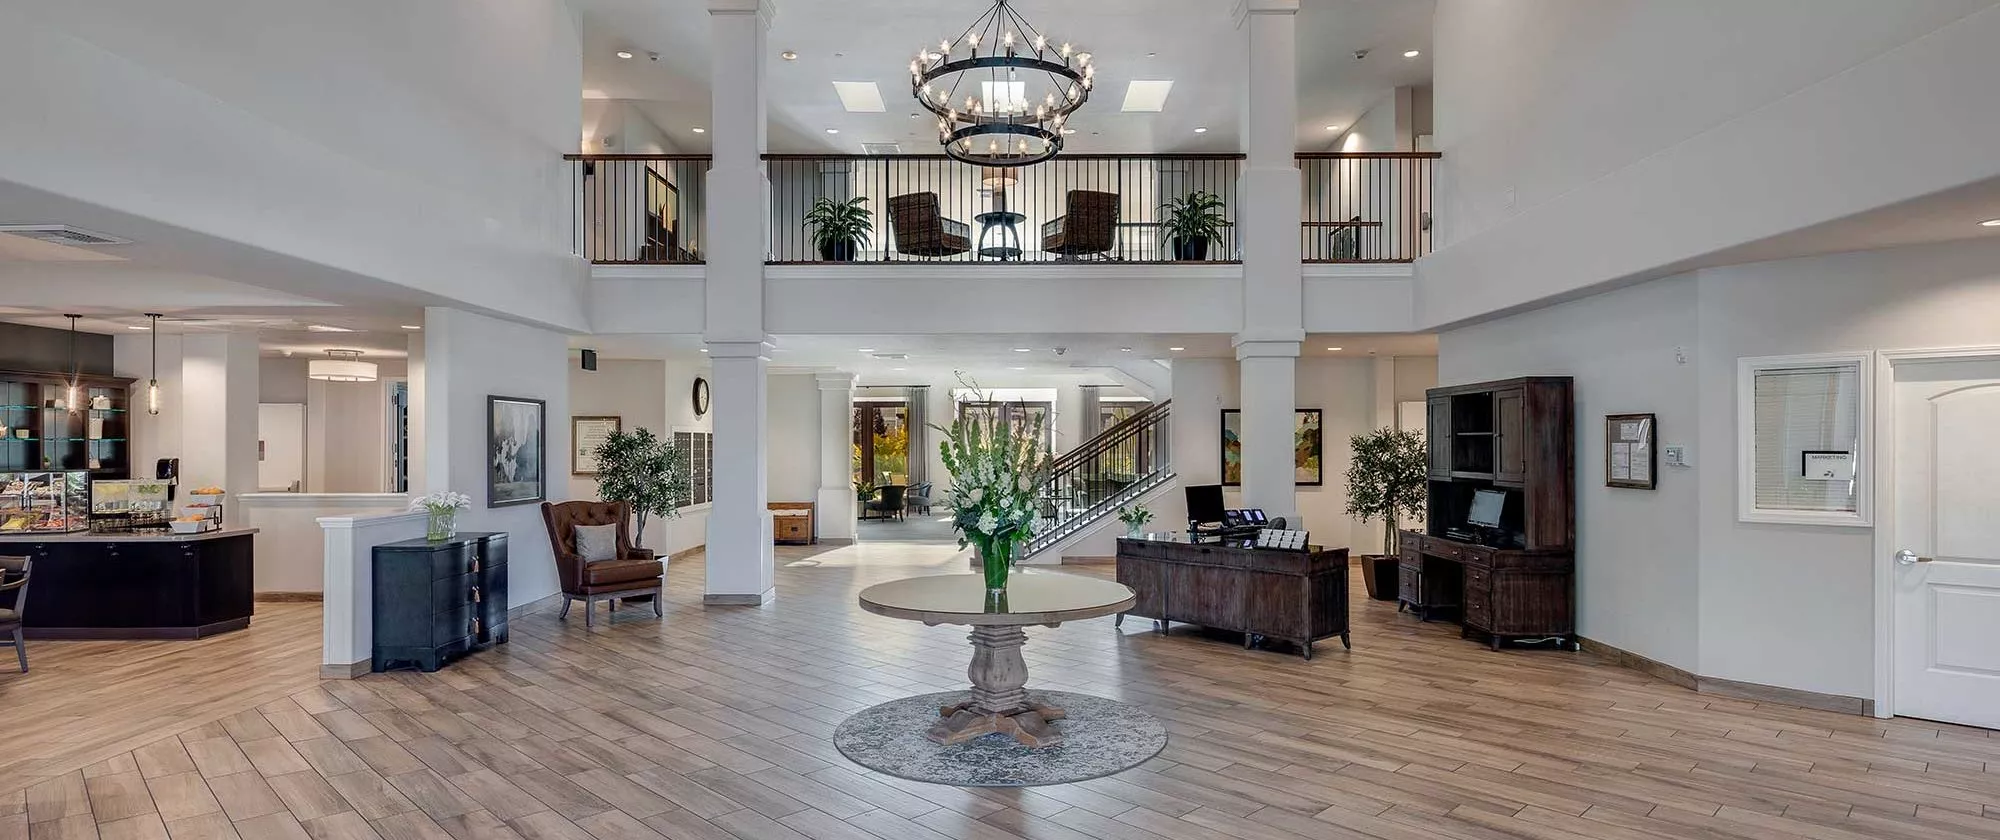 Silver Creek hall with reception desk and table with chandelier